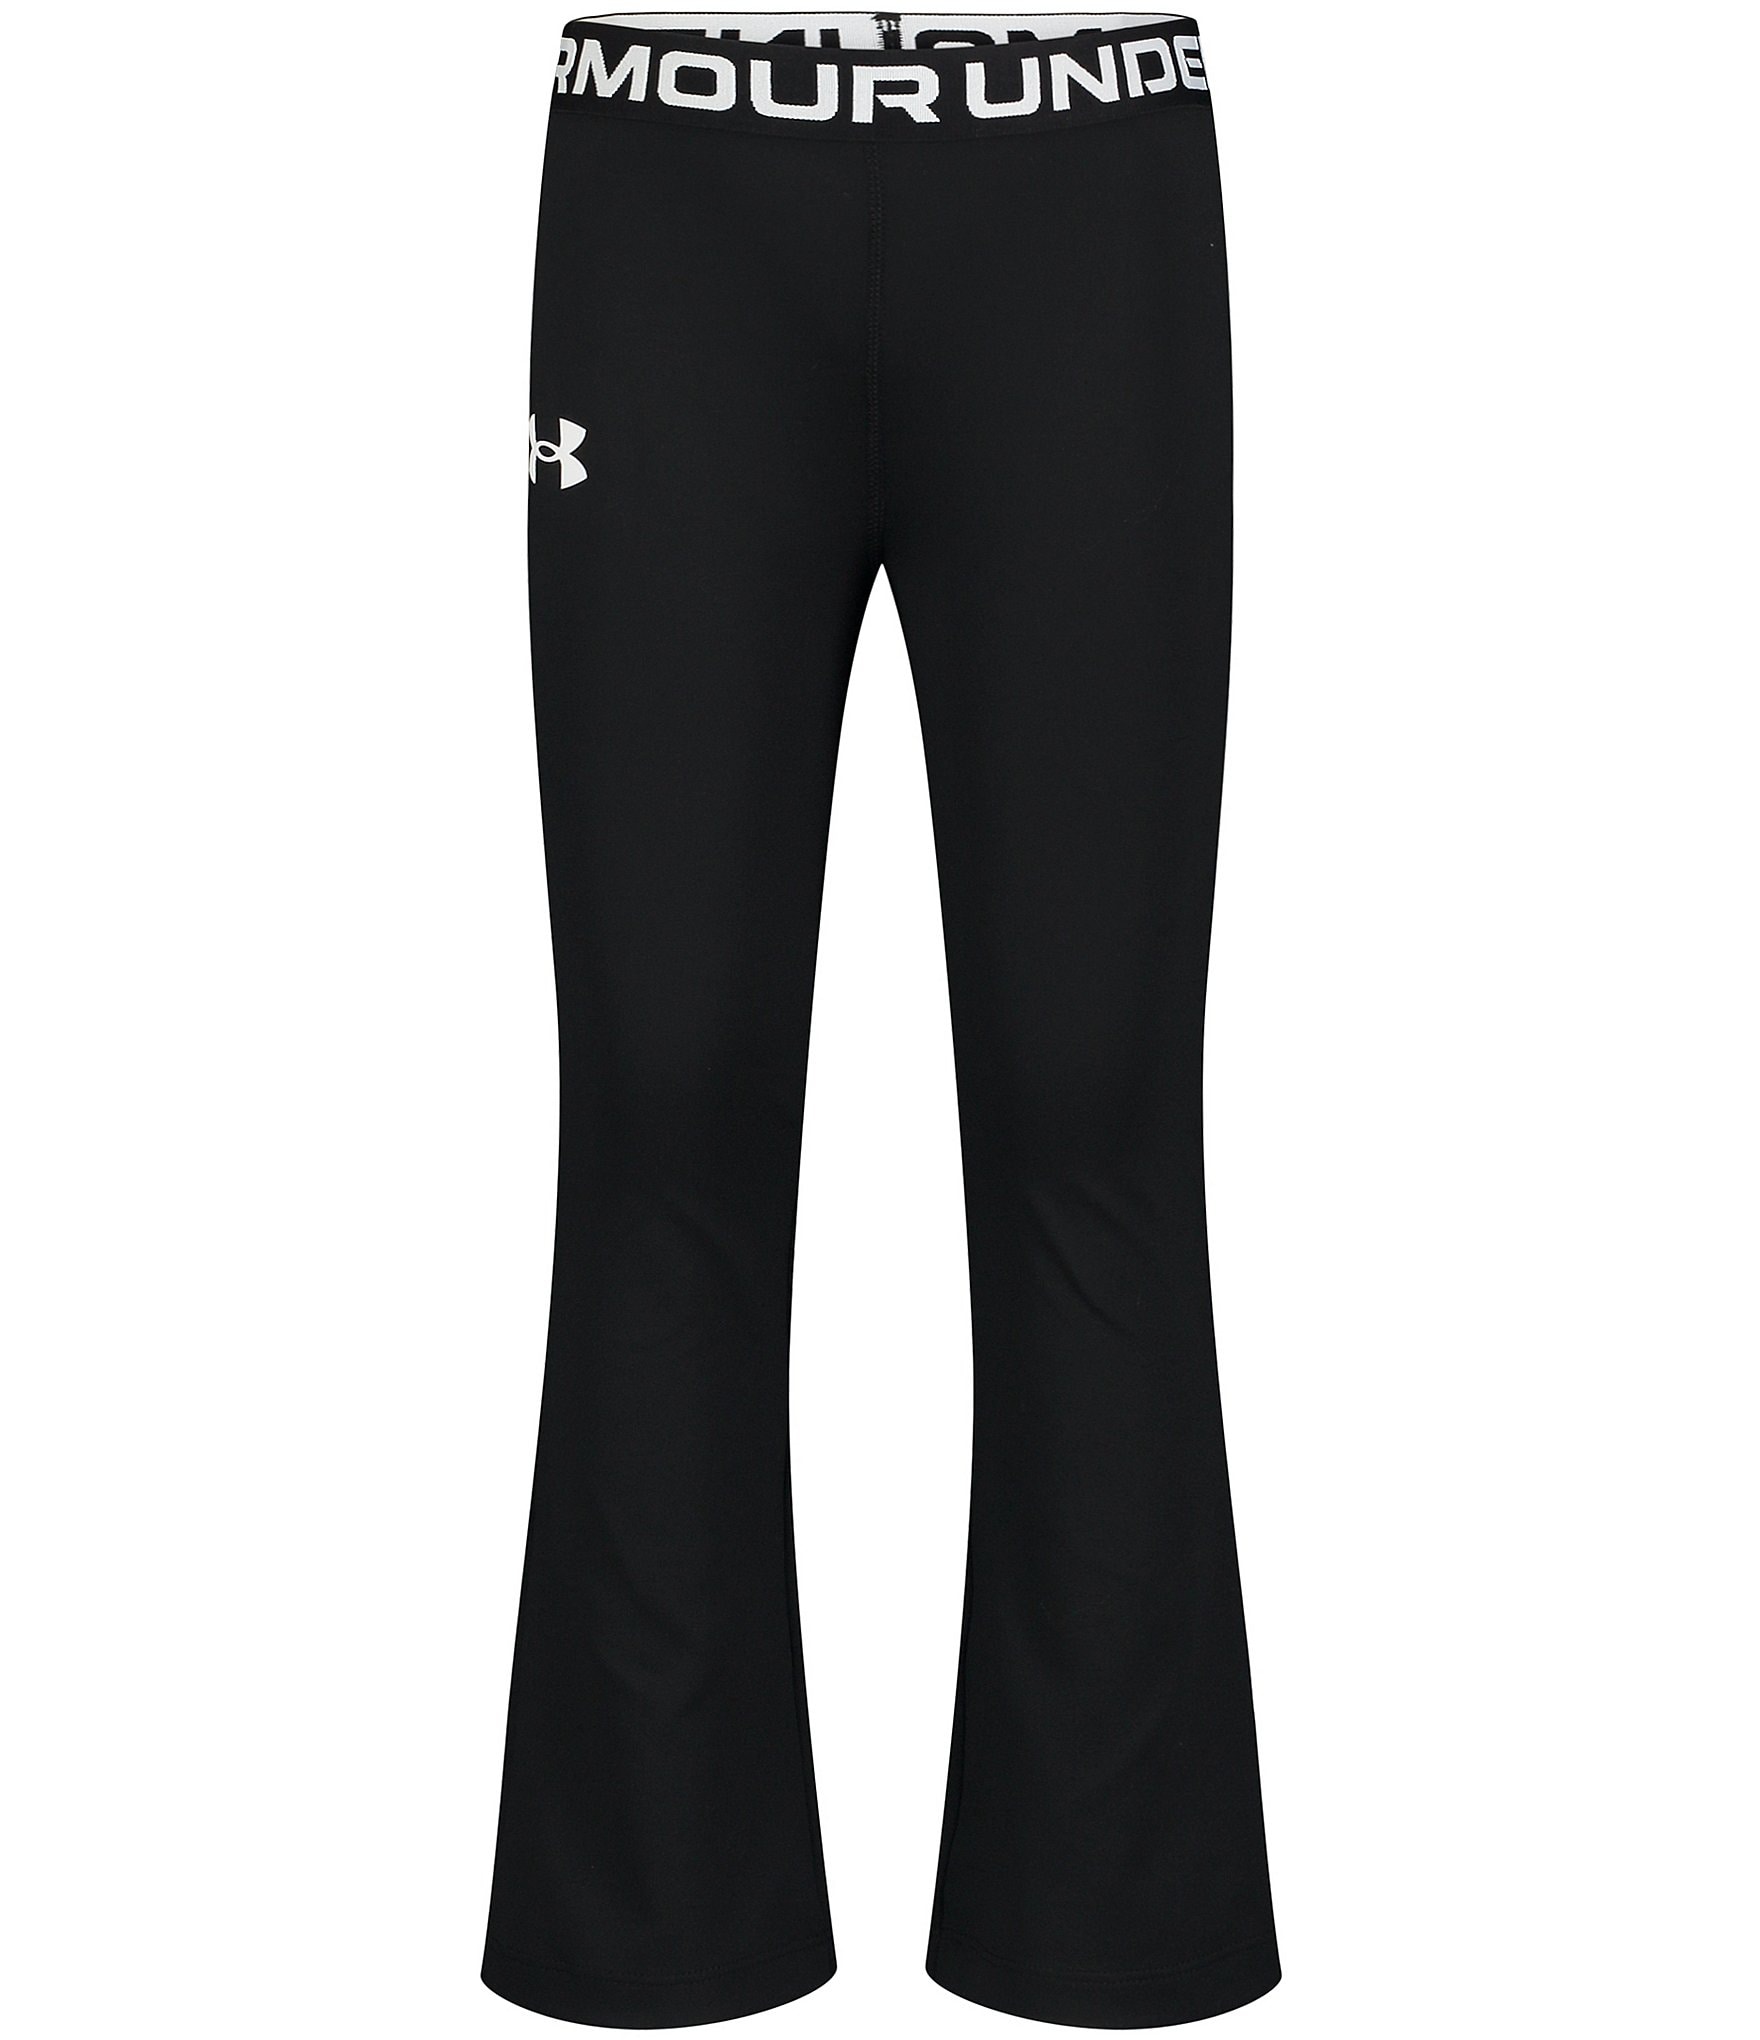 Black Under Armour Girls' Fitness Armour Tights Junior